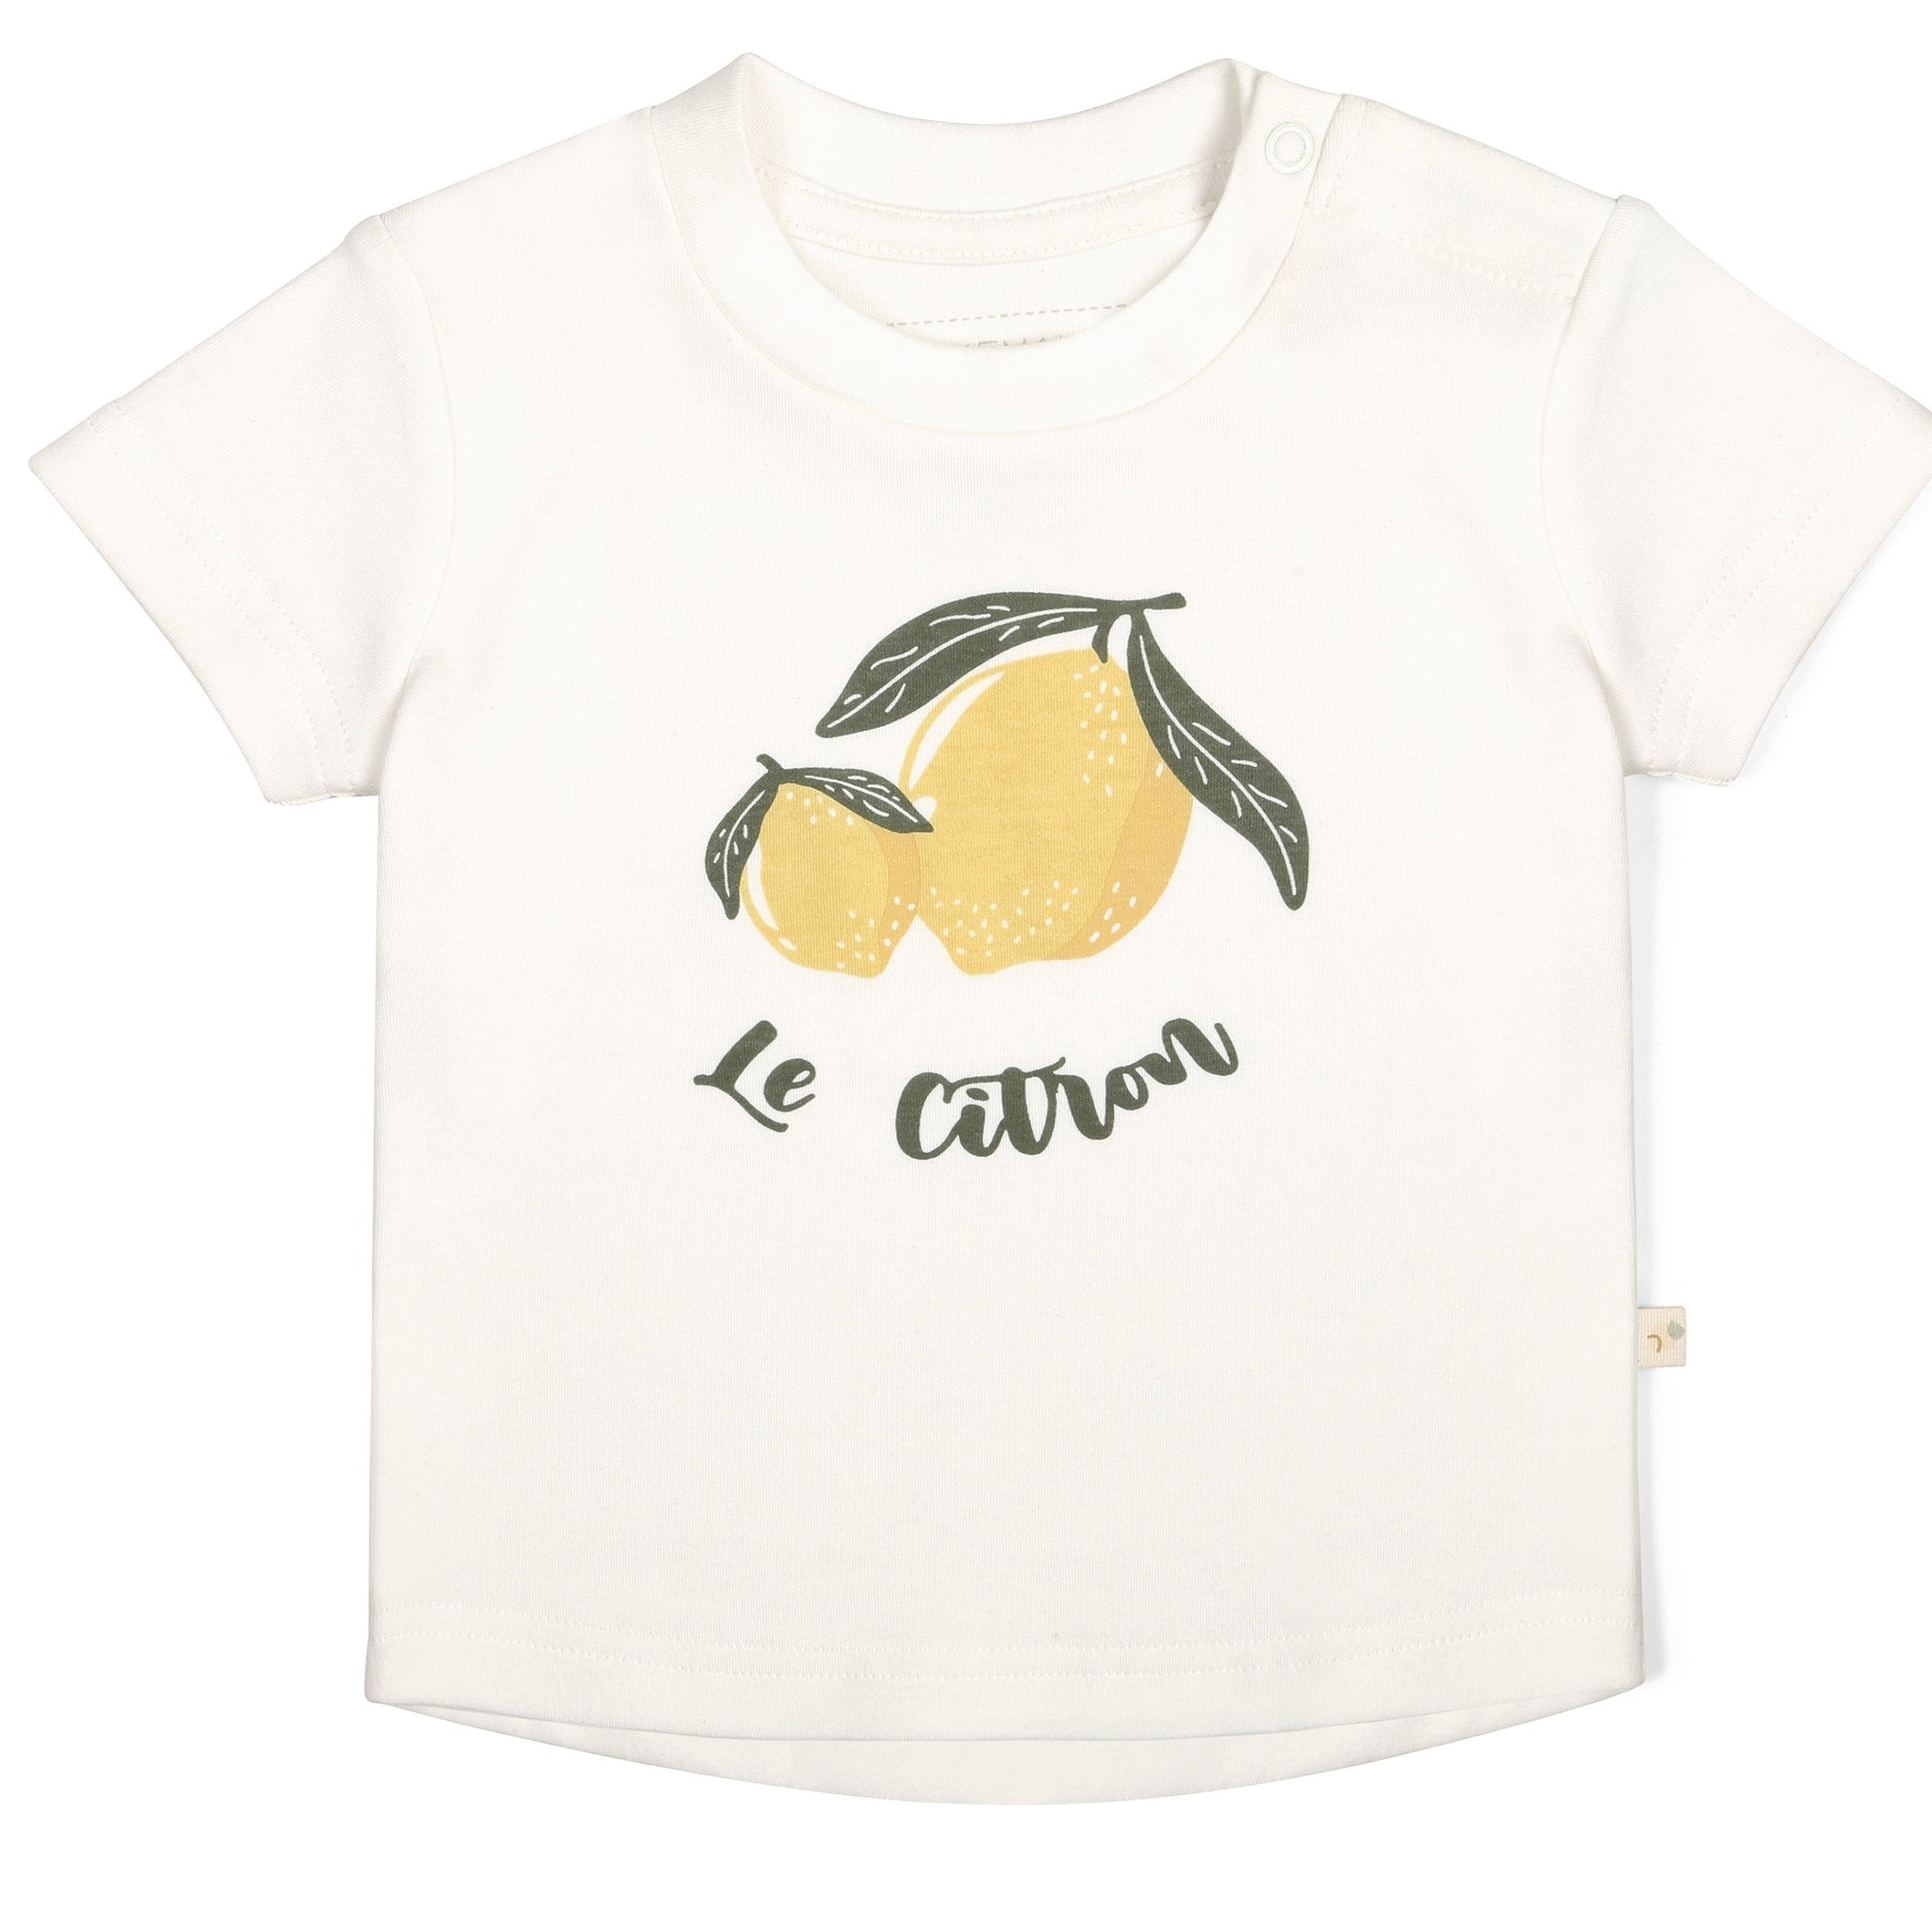 Toddler Organic Crew Neck Tee - Le Citron by Makemake Organics with a print of two yellow lemons and green leaves, and the phrase "le citron" in cursive below. The shirt has a simple round neckline and a snap.